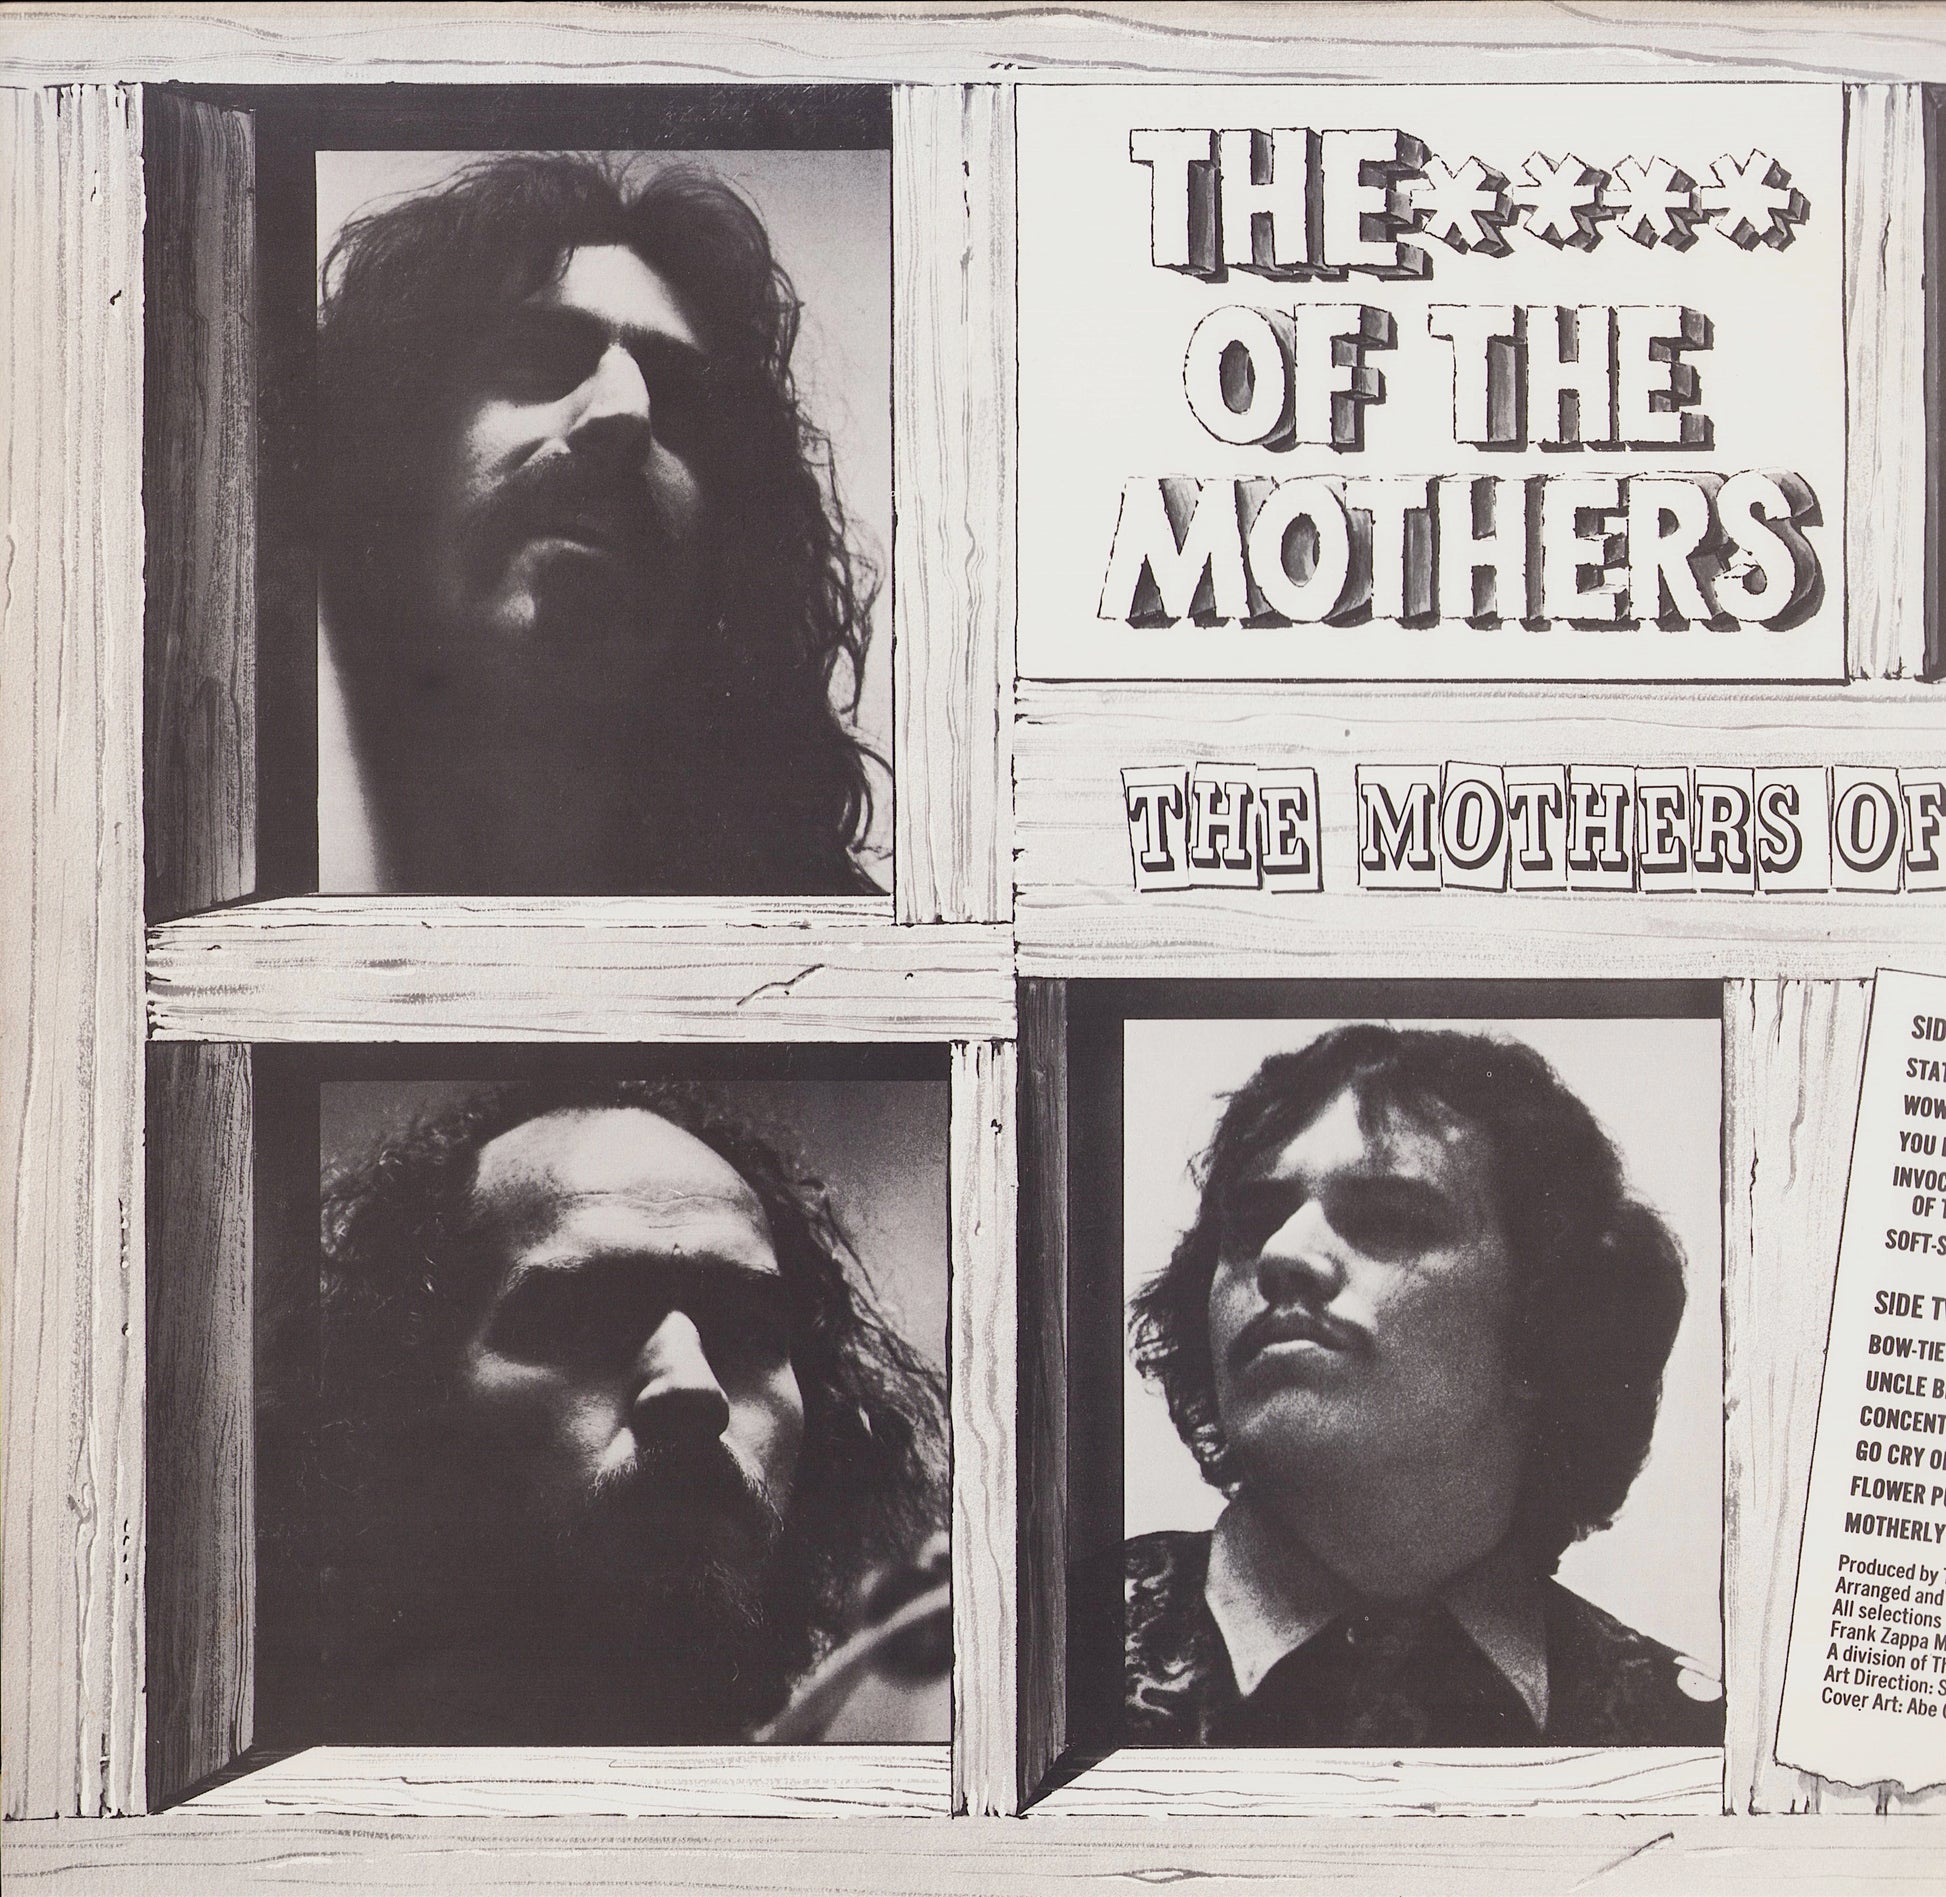 The Mothers Of Invention ‎- The **** Of The Mothers Vinyl LP DE